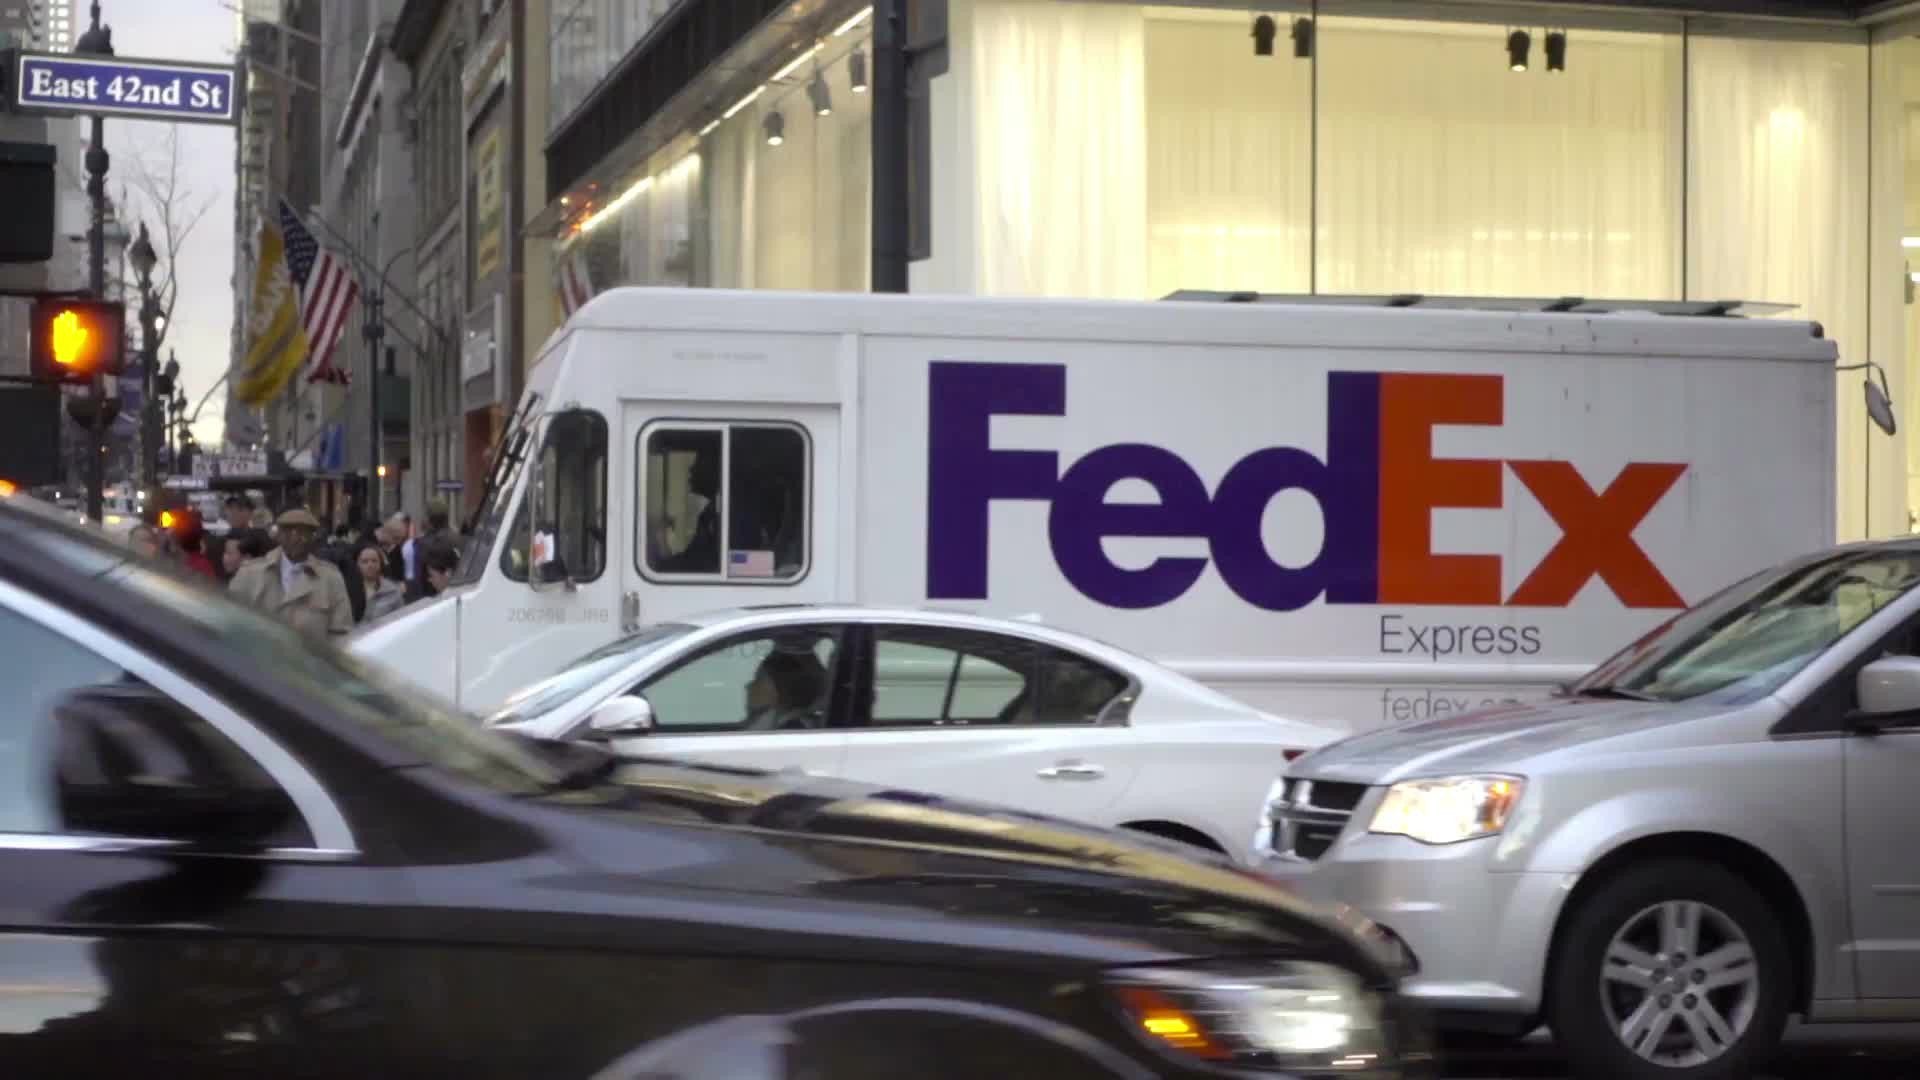 Fed Ex truck driving in Midtown Manhattan with cars and taxi cabs and NYPD traffic cop, busy intersection in NYC